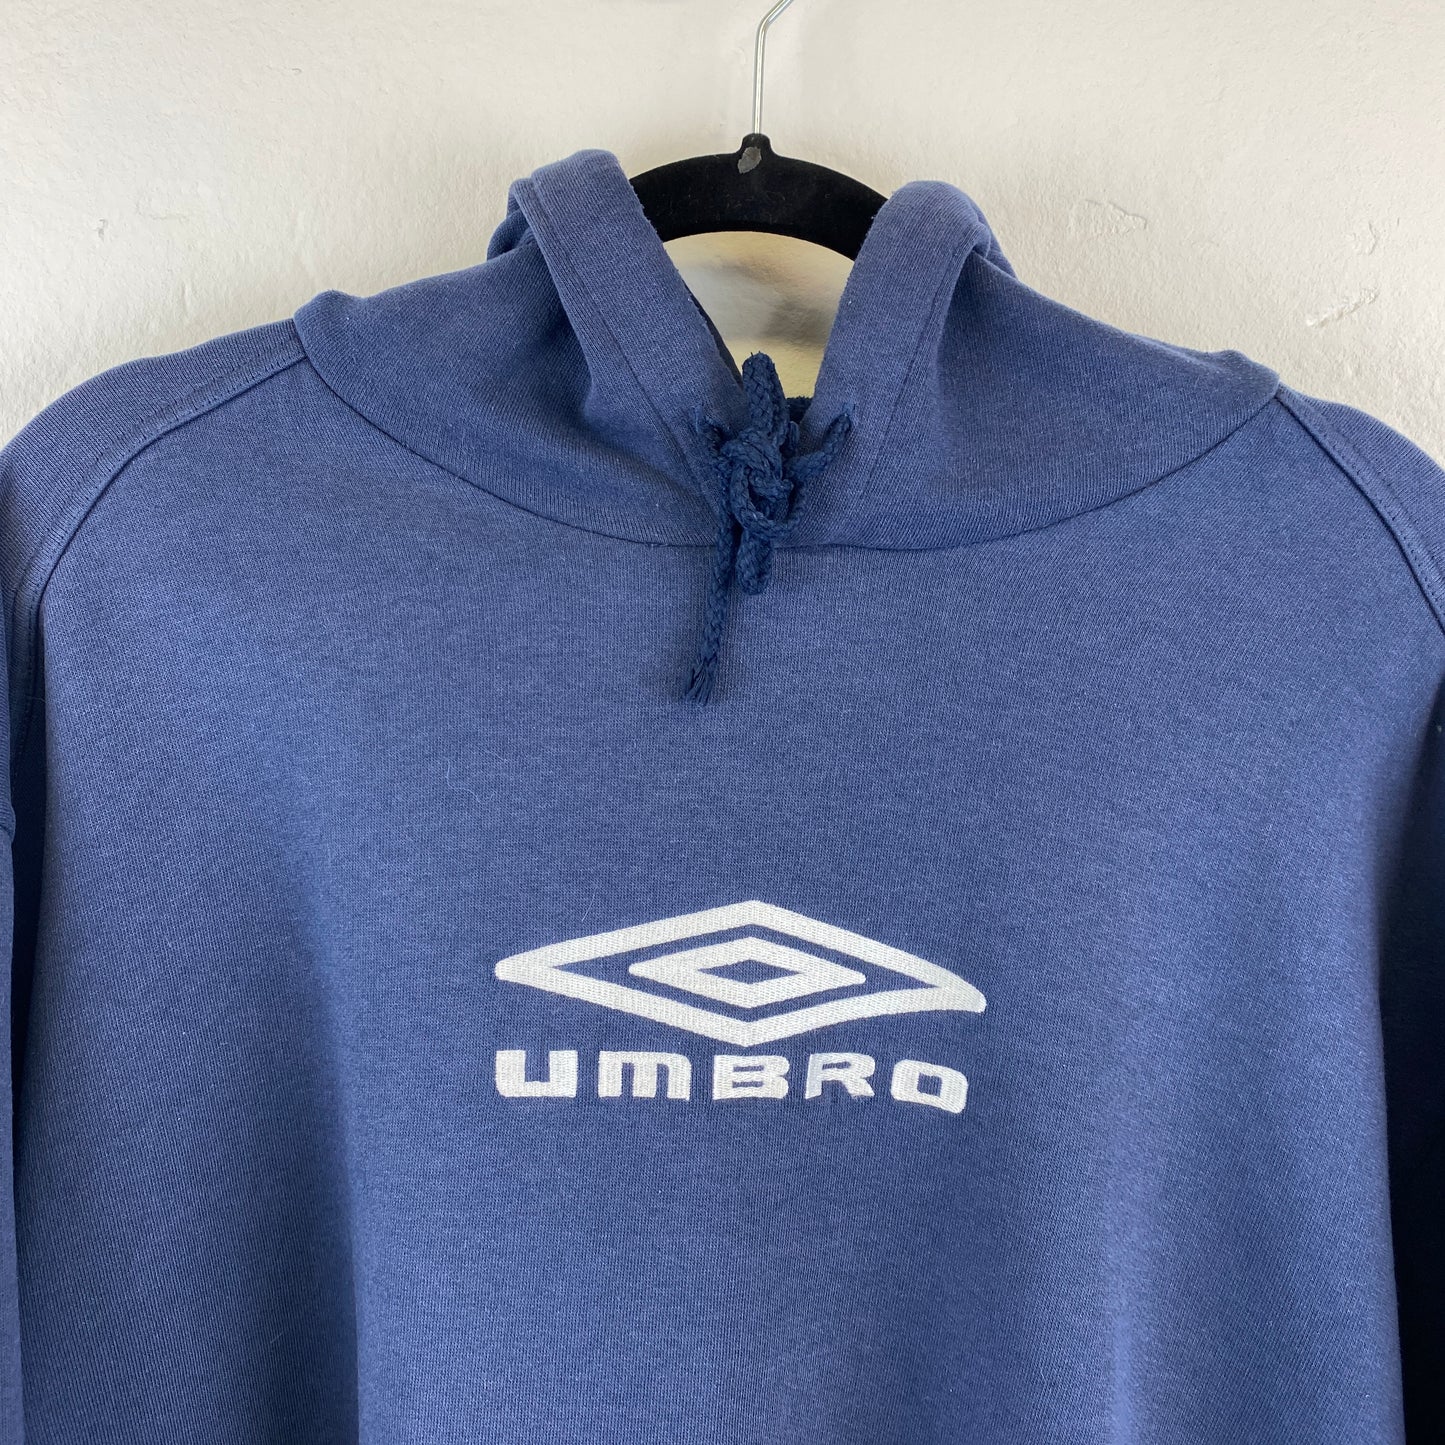 Umbro embroidered hoodie (M-L)